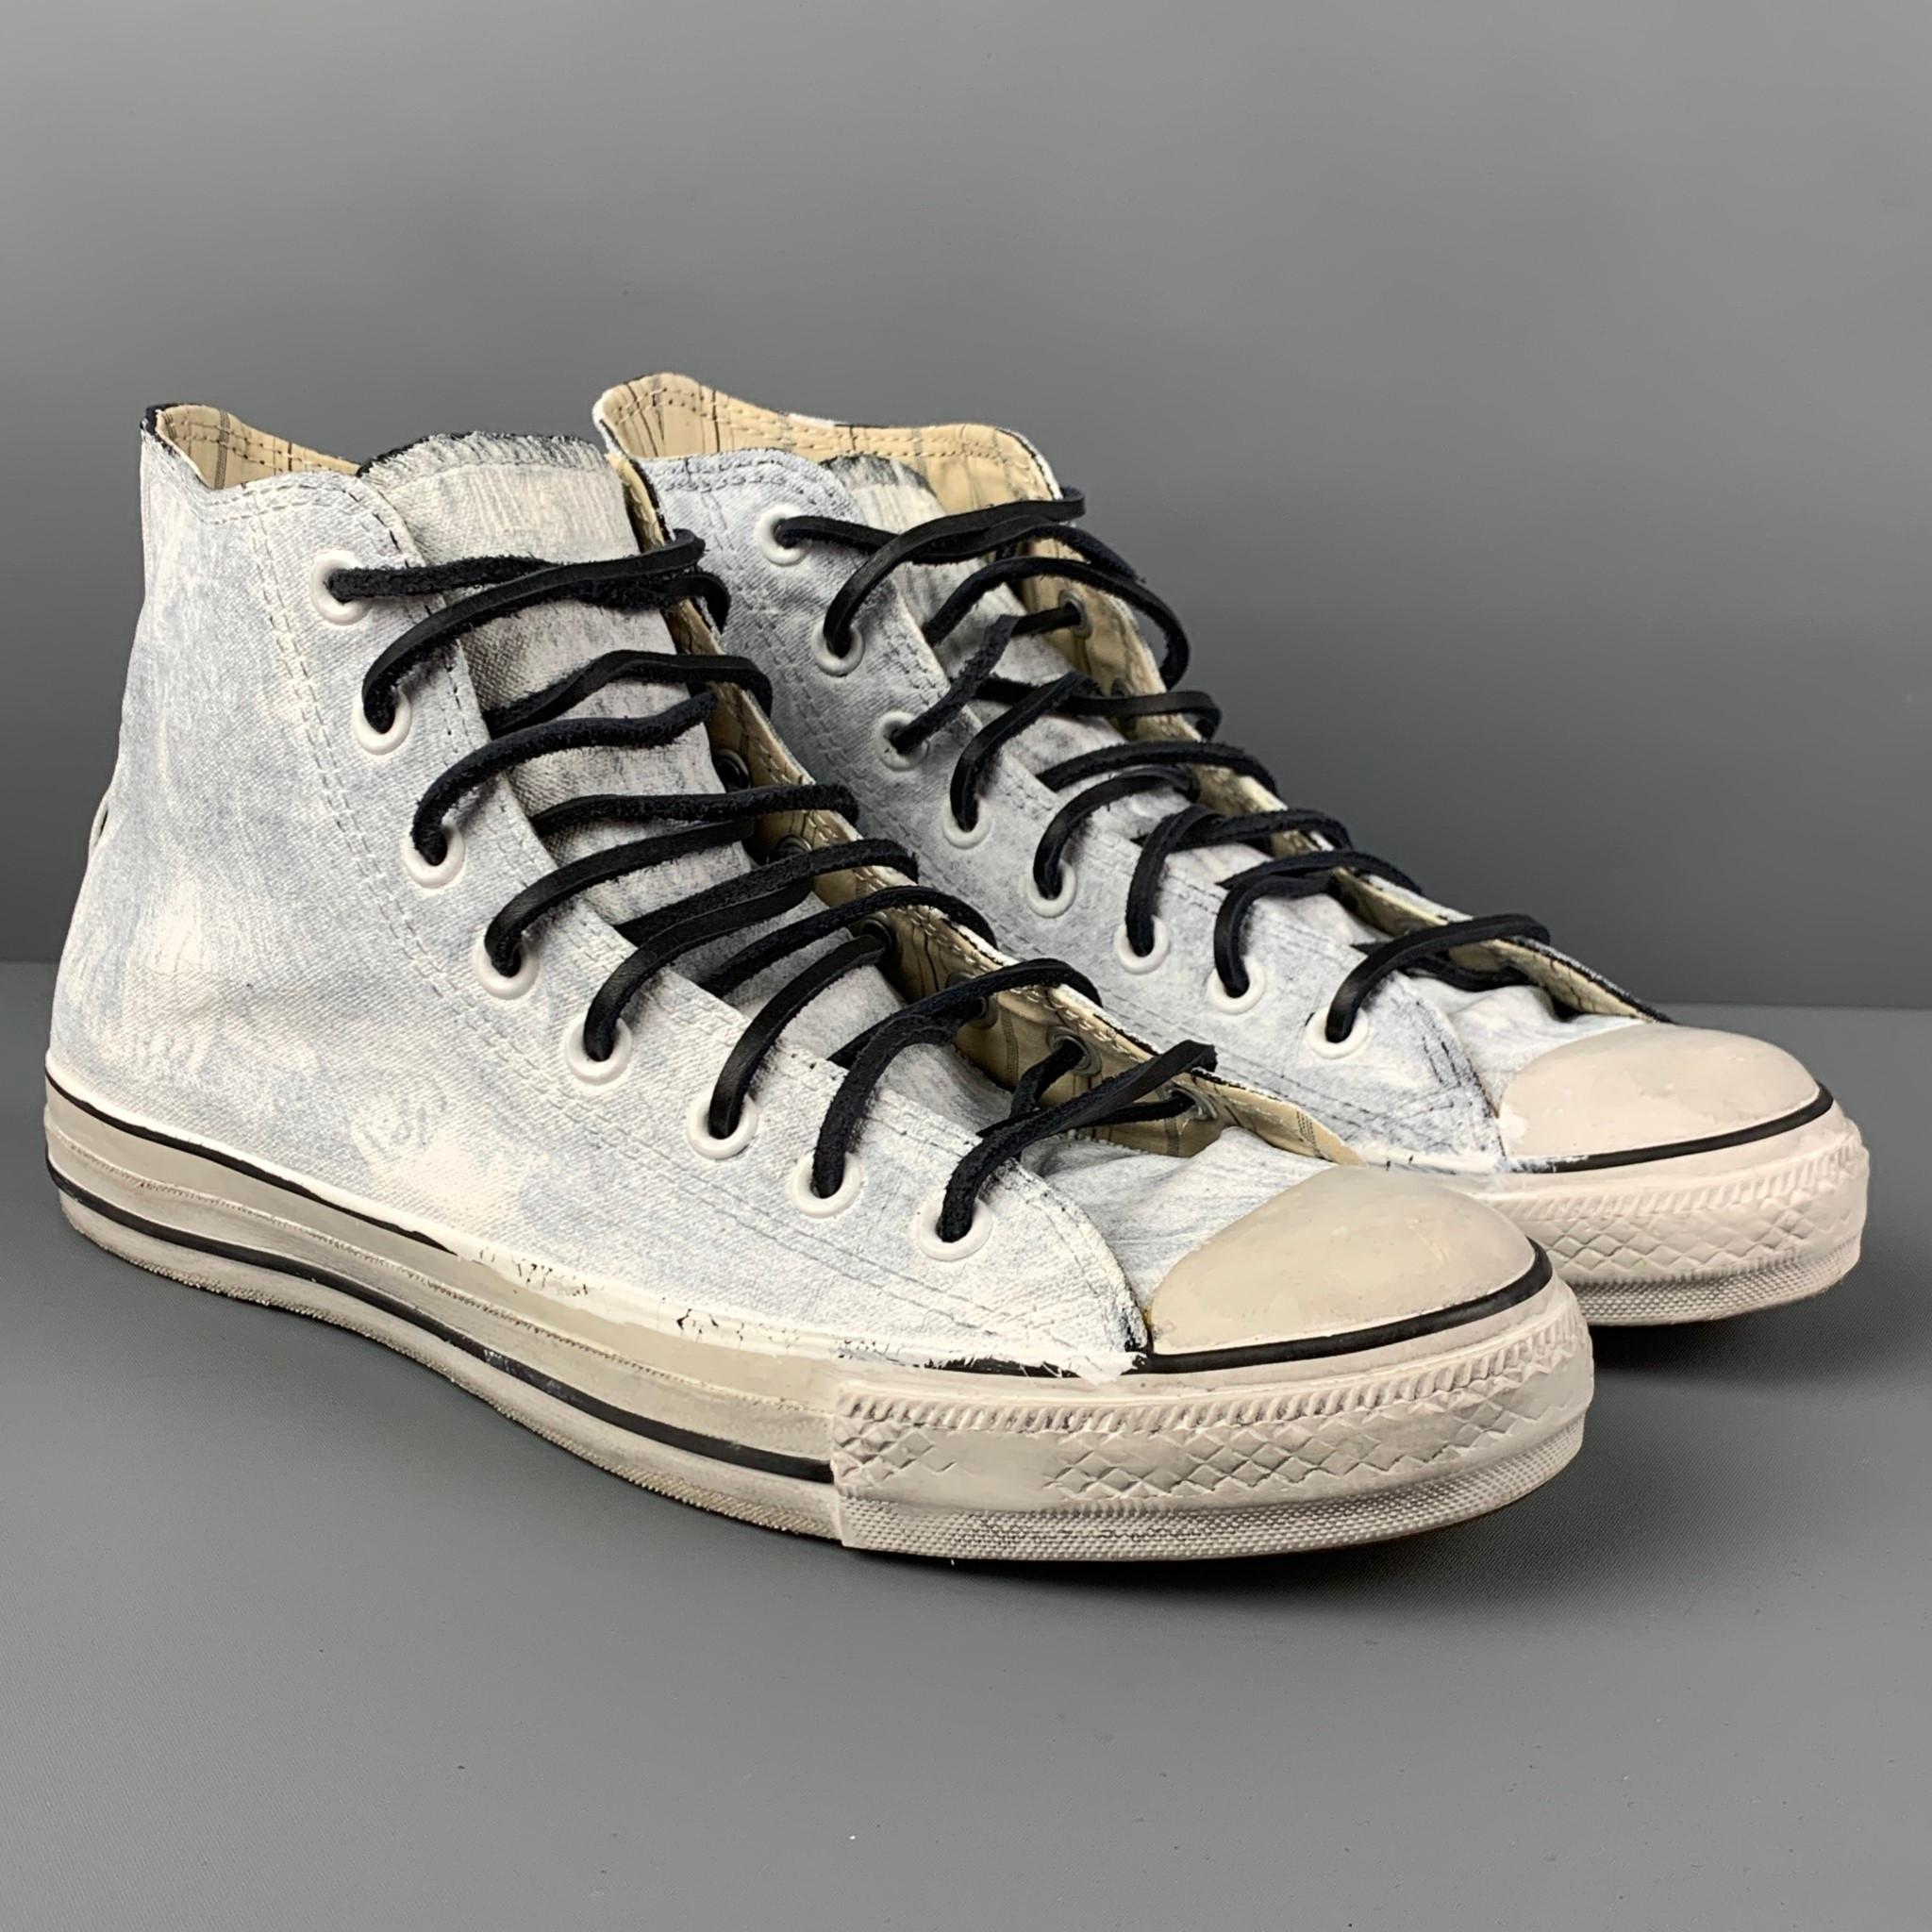 JOHN VARVATOS x CONVERSE sneakers comes in a white painted canvas featuring a high top style and a lace up closure. Includes box.

Very Good Pre-Owned Condition.
Marked: 10

Outsole: 11.75 in. x 3.75 in. 